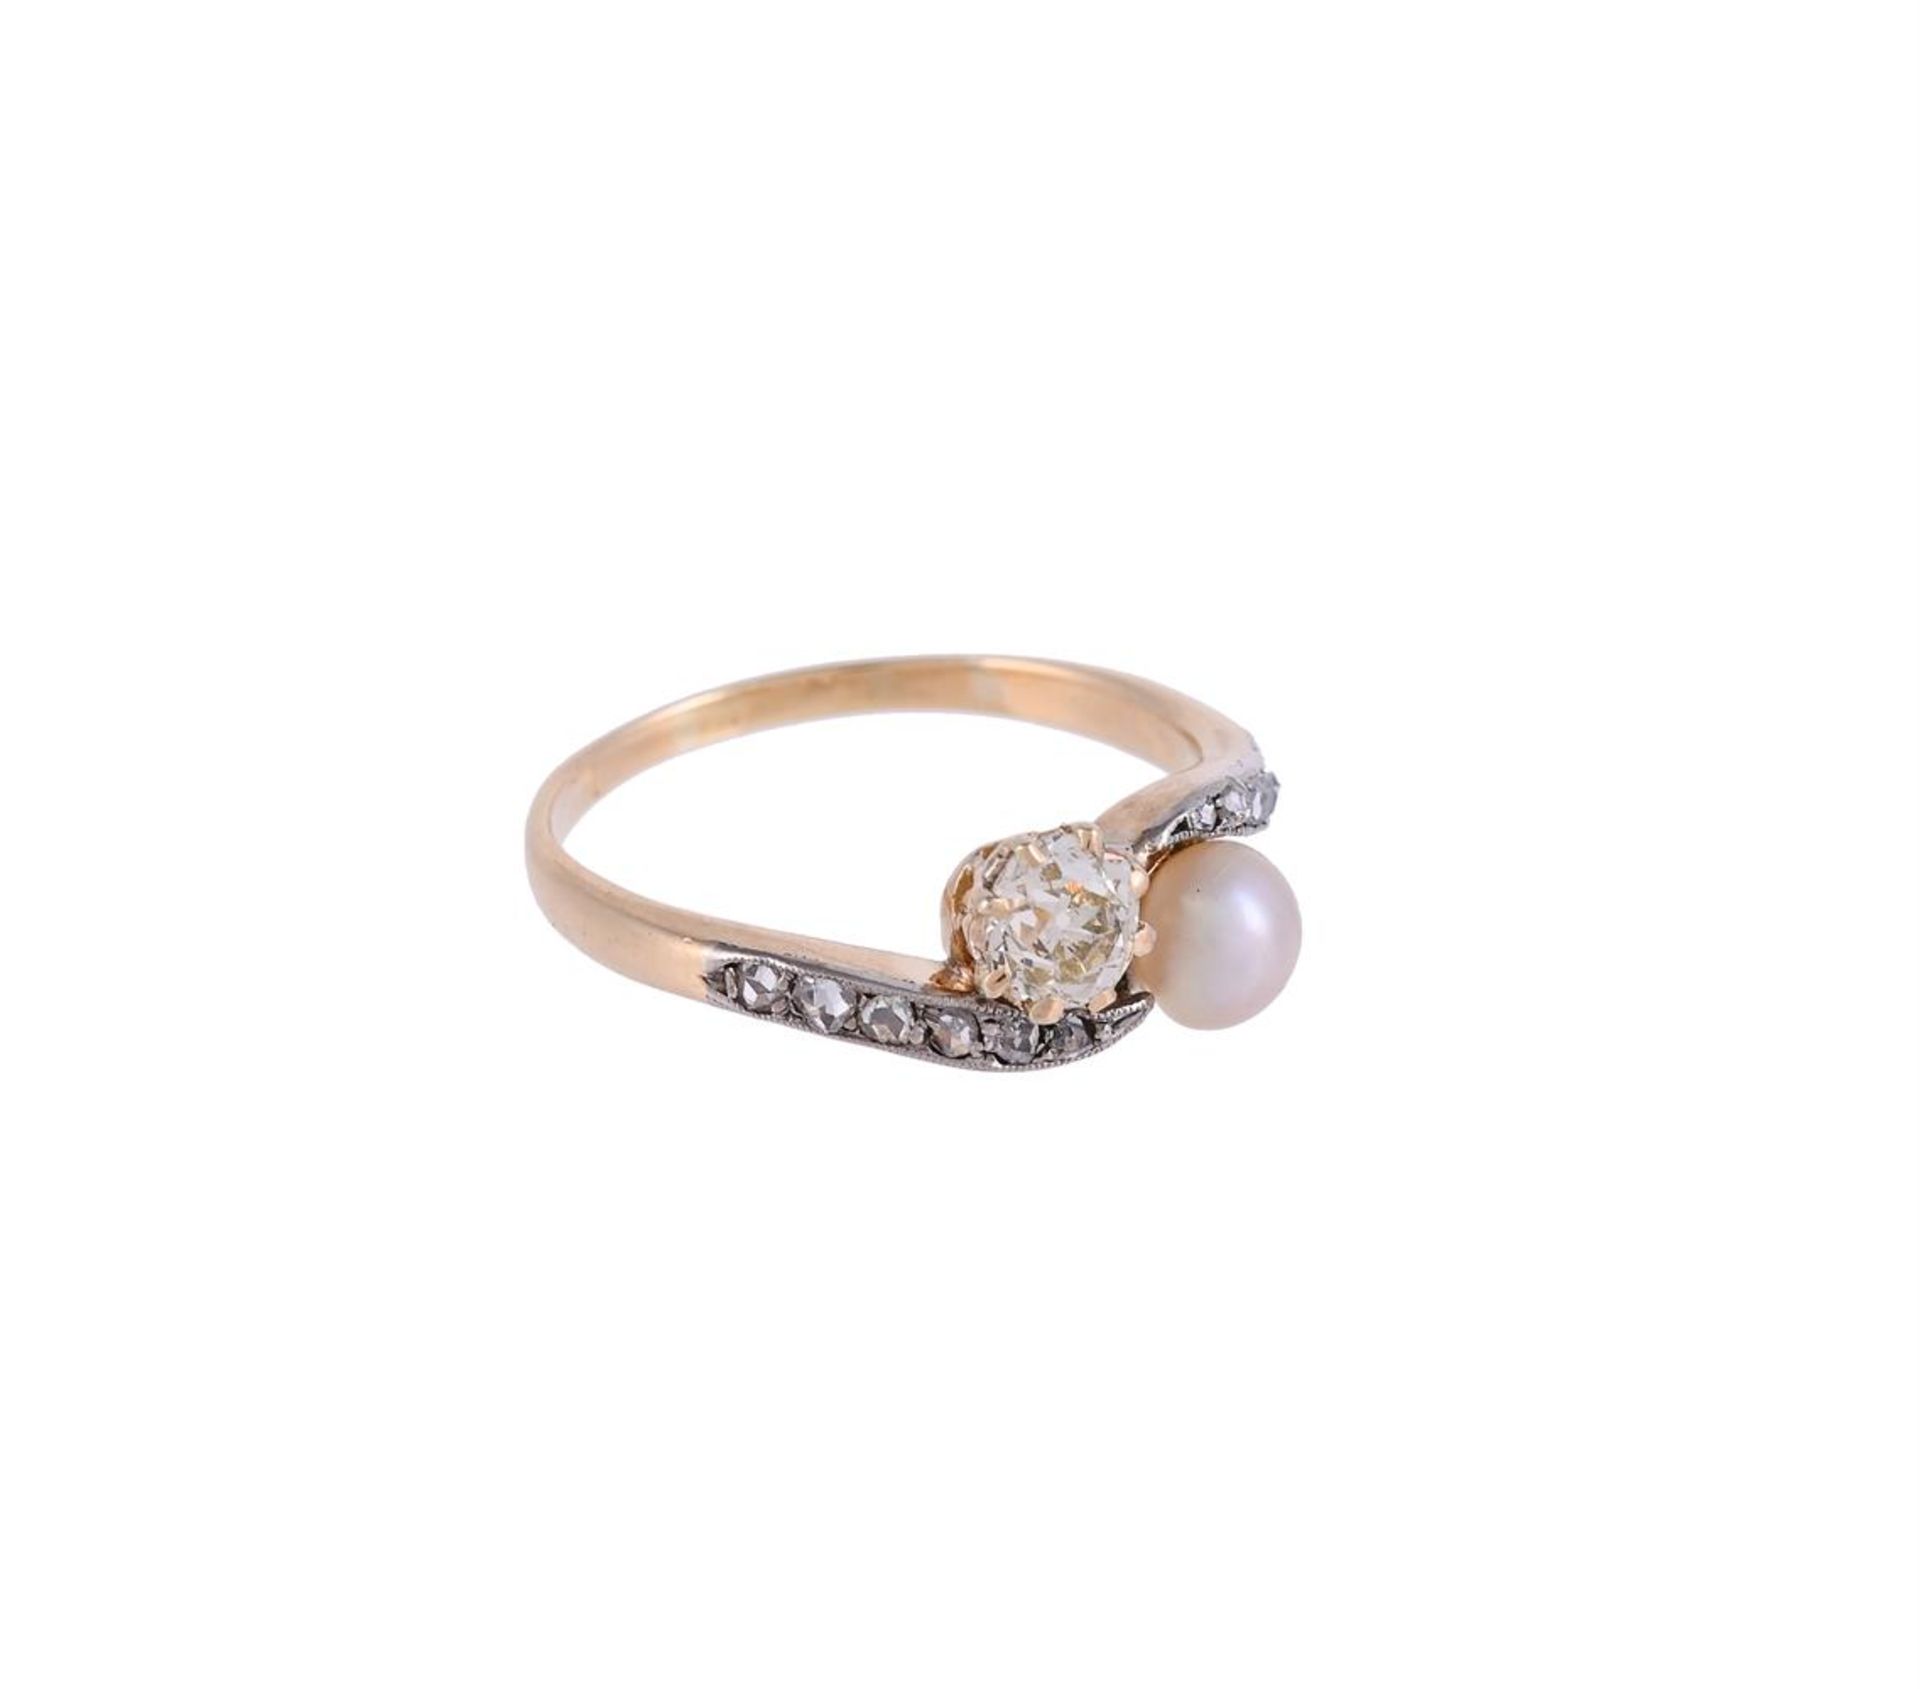 A DIAMOND AND PEARL TOI ET MOI RING - Image 2 of 2